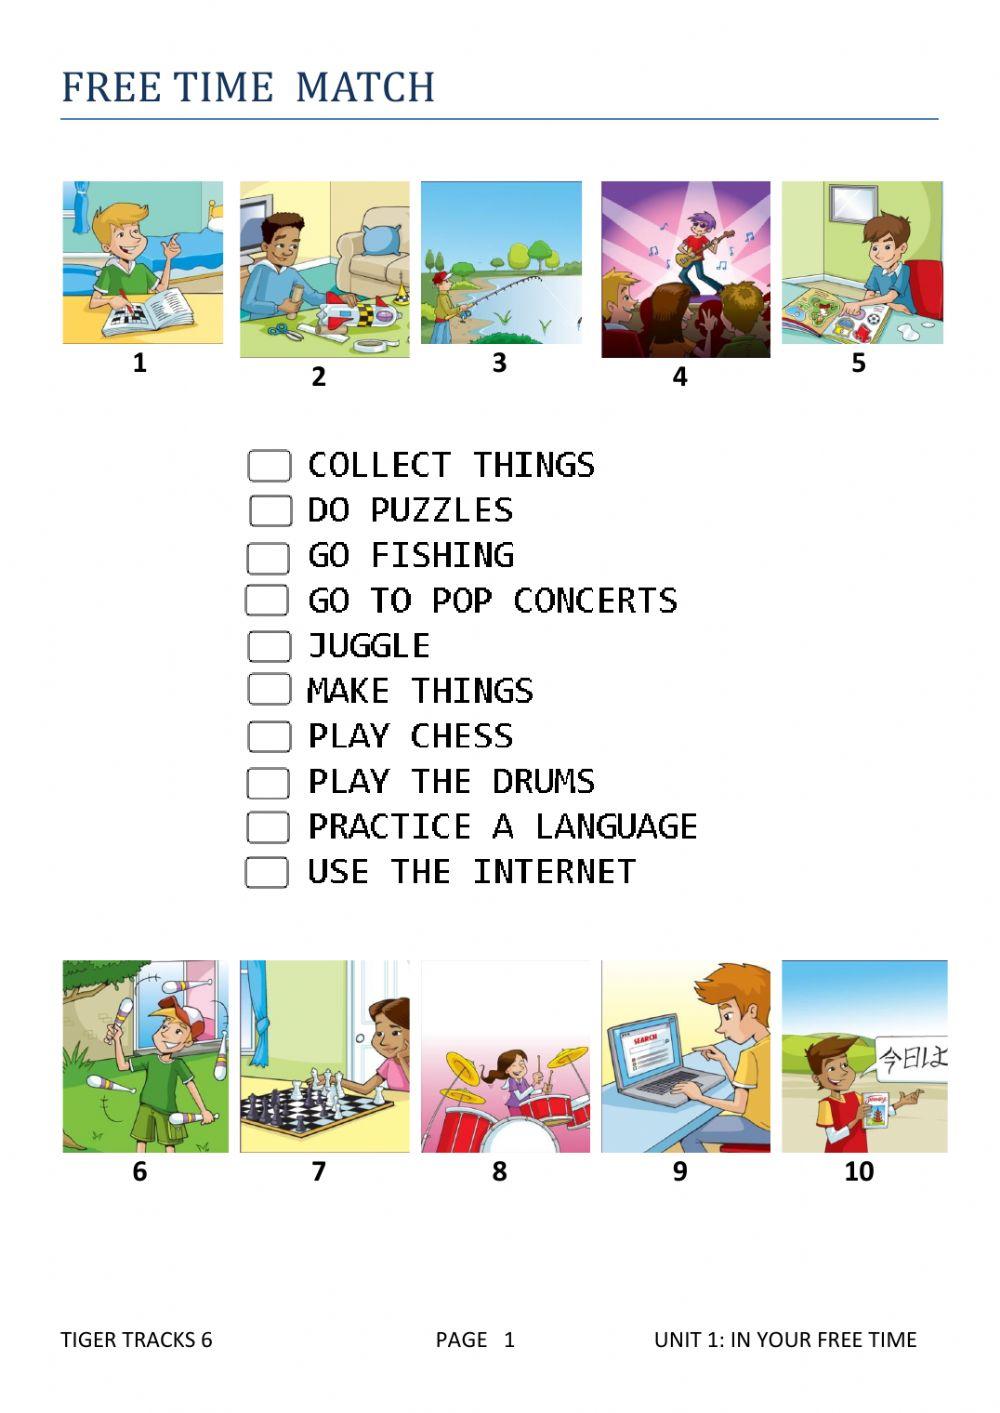 Match the free time activities tiger 6